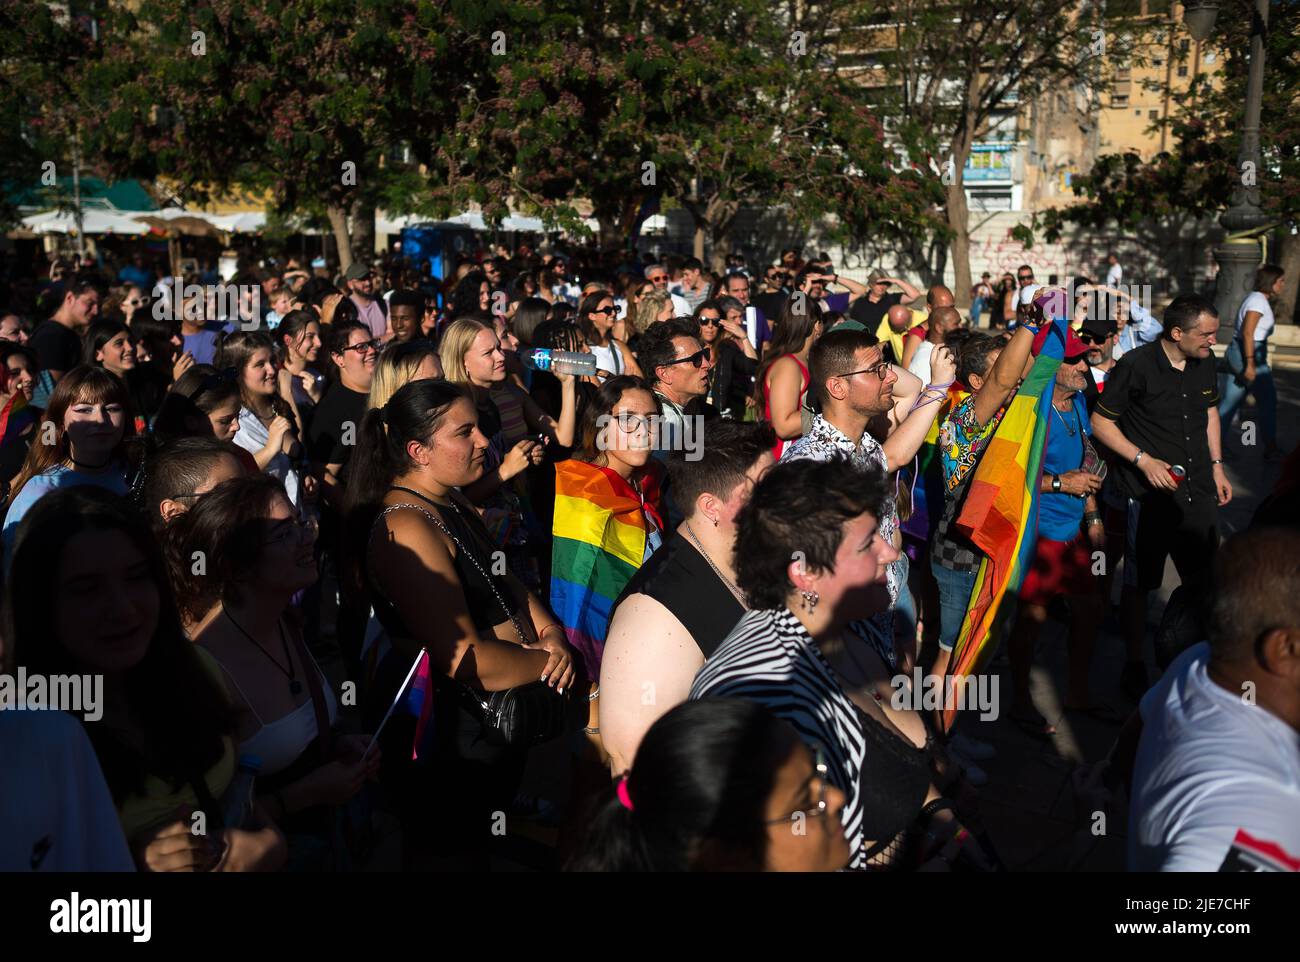 Malaga, Spain. 25th June, 2022. People are seen celebrating after the demonstration. Under the slogan : 'Malaga, Proud and diverse' hundred of people have marched along the main streets in favor of LGTBIQ  rights and against homophobia and transphobia, as part of the Pride celebrations. Credit: SOPA Images Limited/Alamy Live News Stock Photo